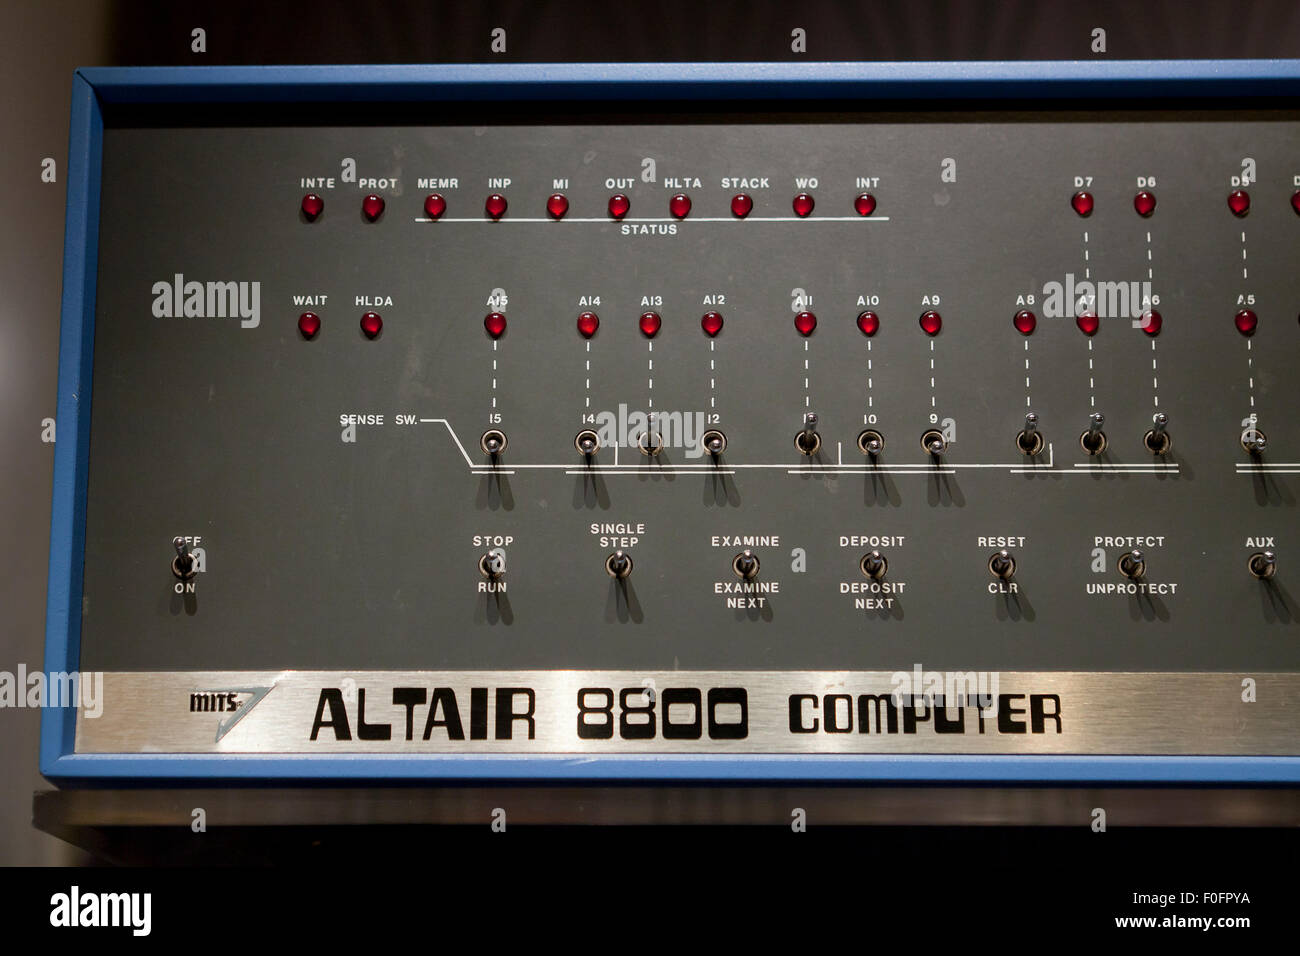 MITS Altair 8800 computer - USA Foto Stock